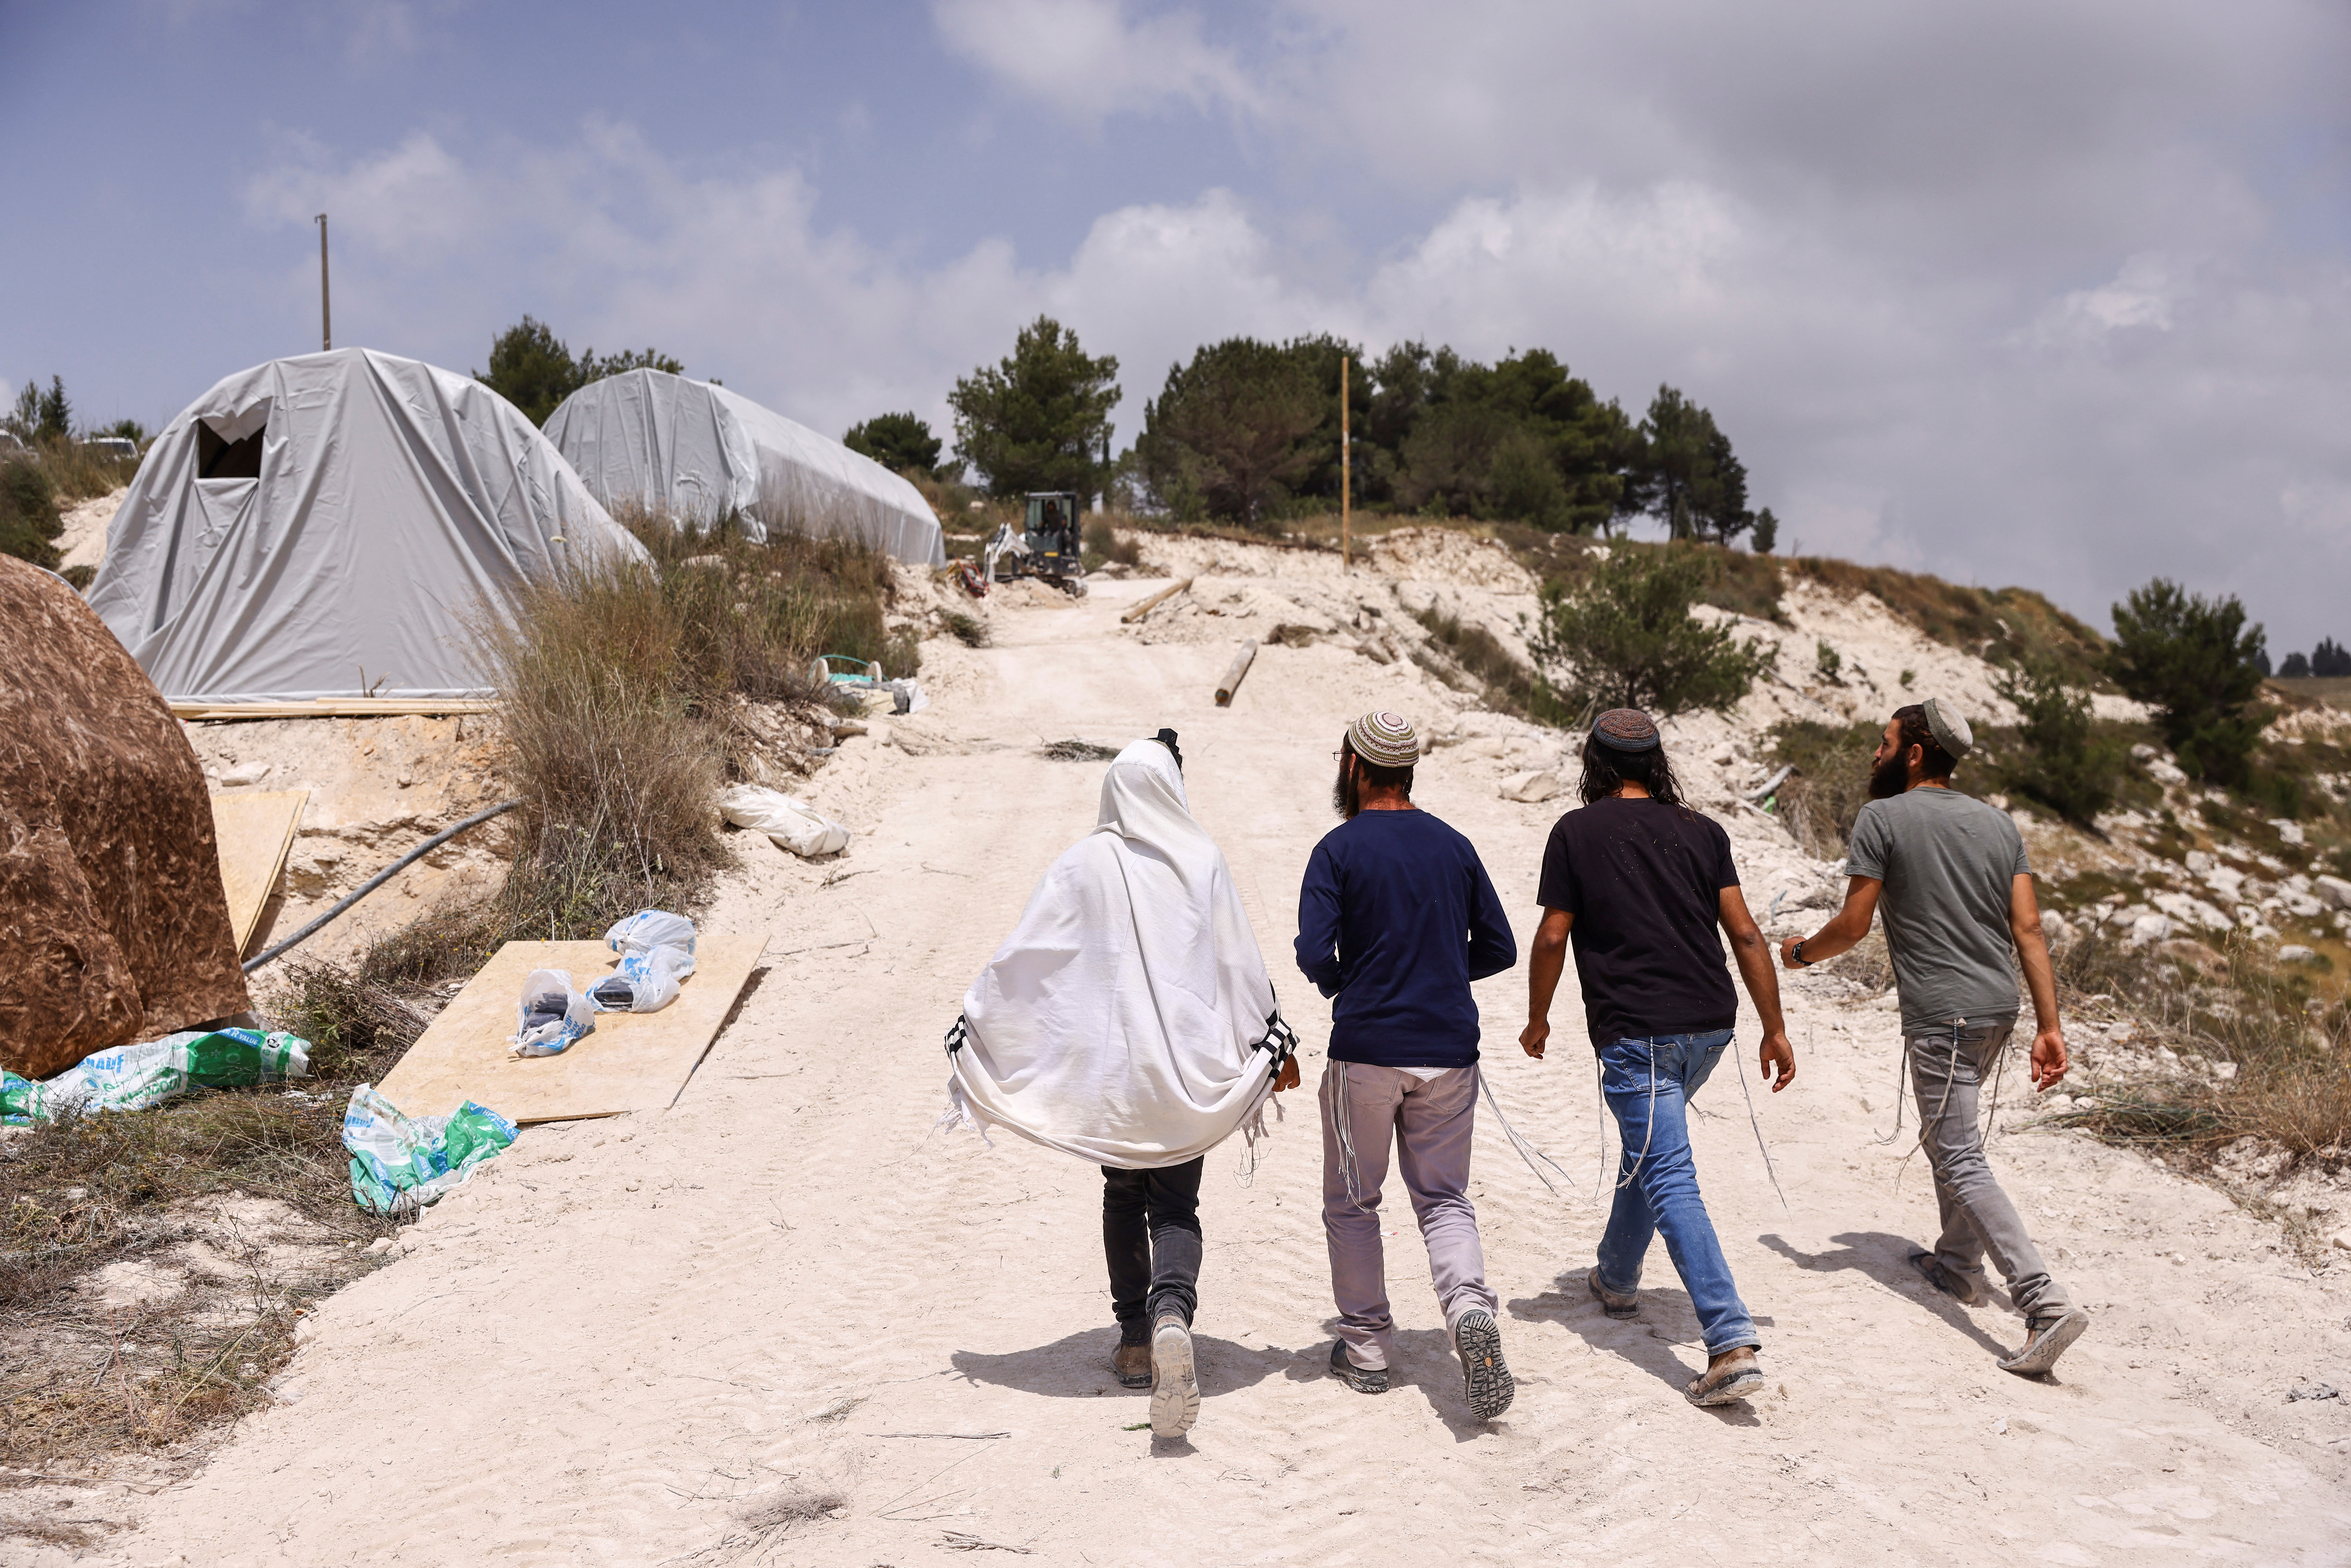 Israeli settlers walk past structures that were erected for a new Jewish seminary school, in the settler outpost of Homesh in the Israeli-occupied West Bank